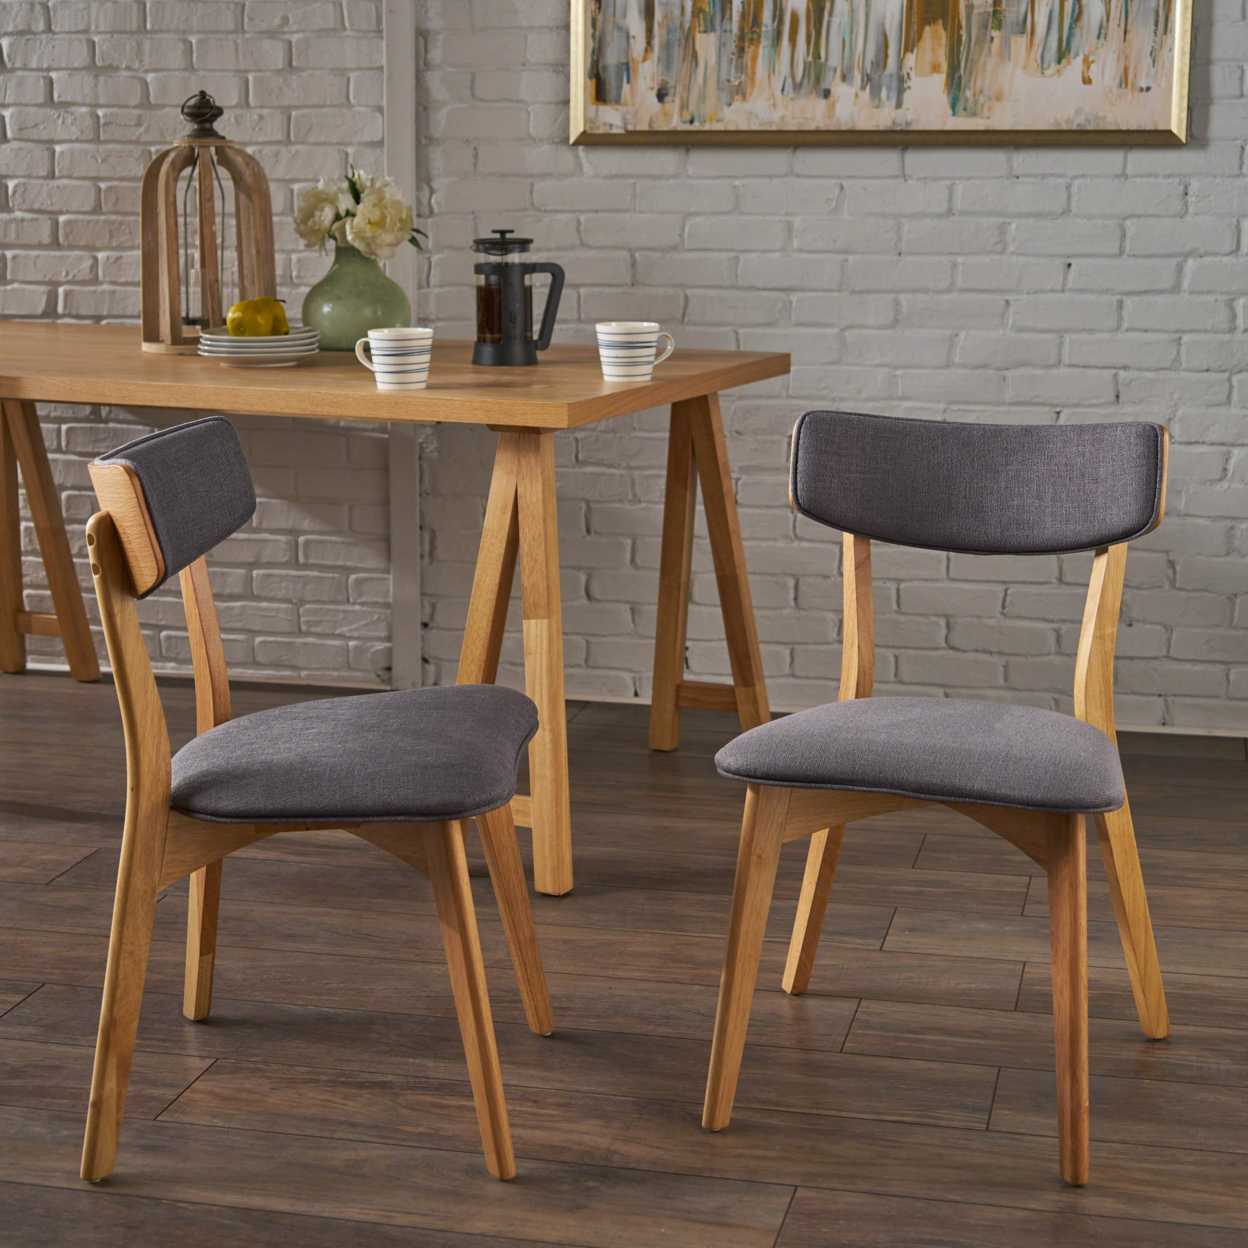 Molly Mid Century Modern Dining Chairs With Rubberwood Frame (Set Of 2) - Light Beige/Natural Walnut